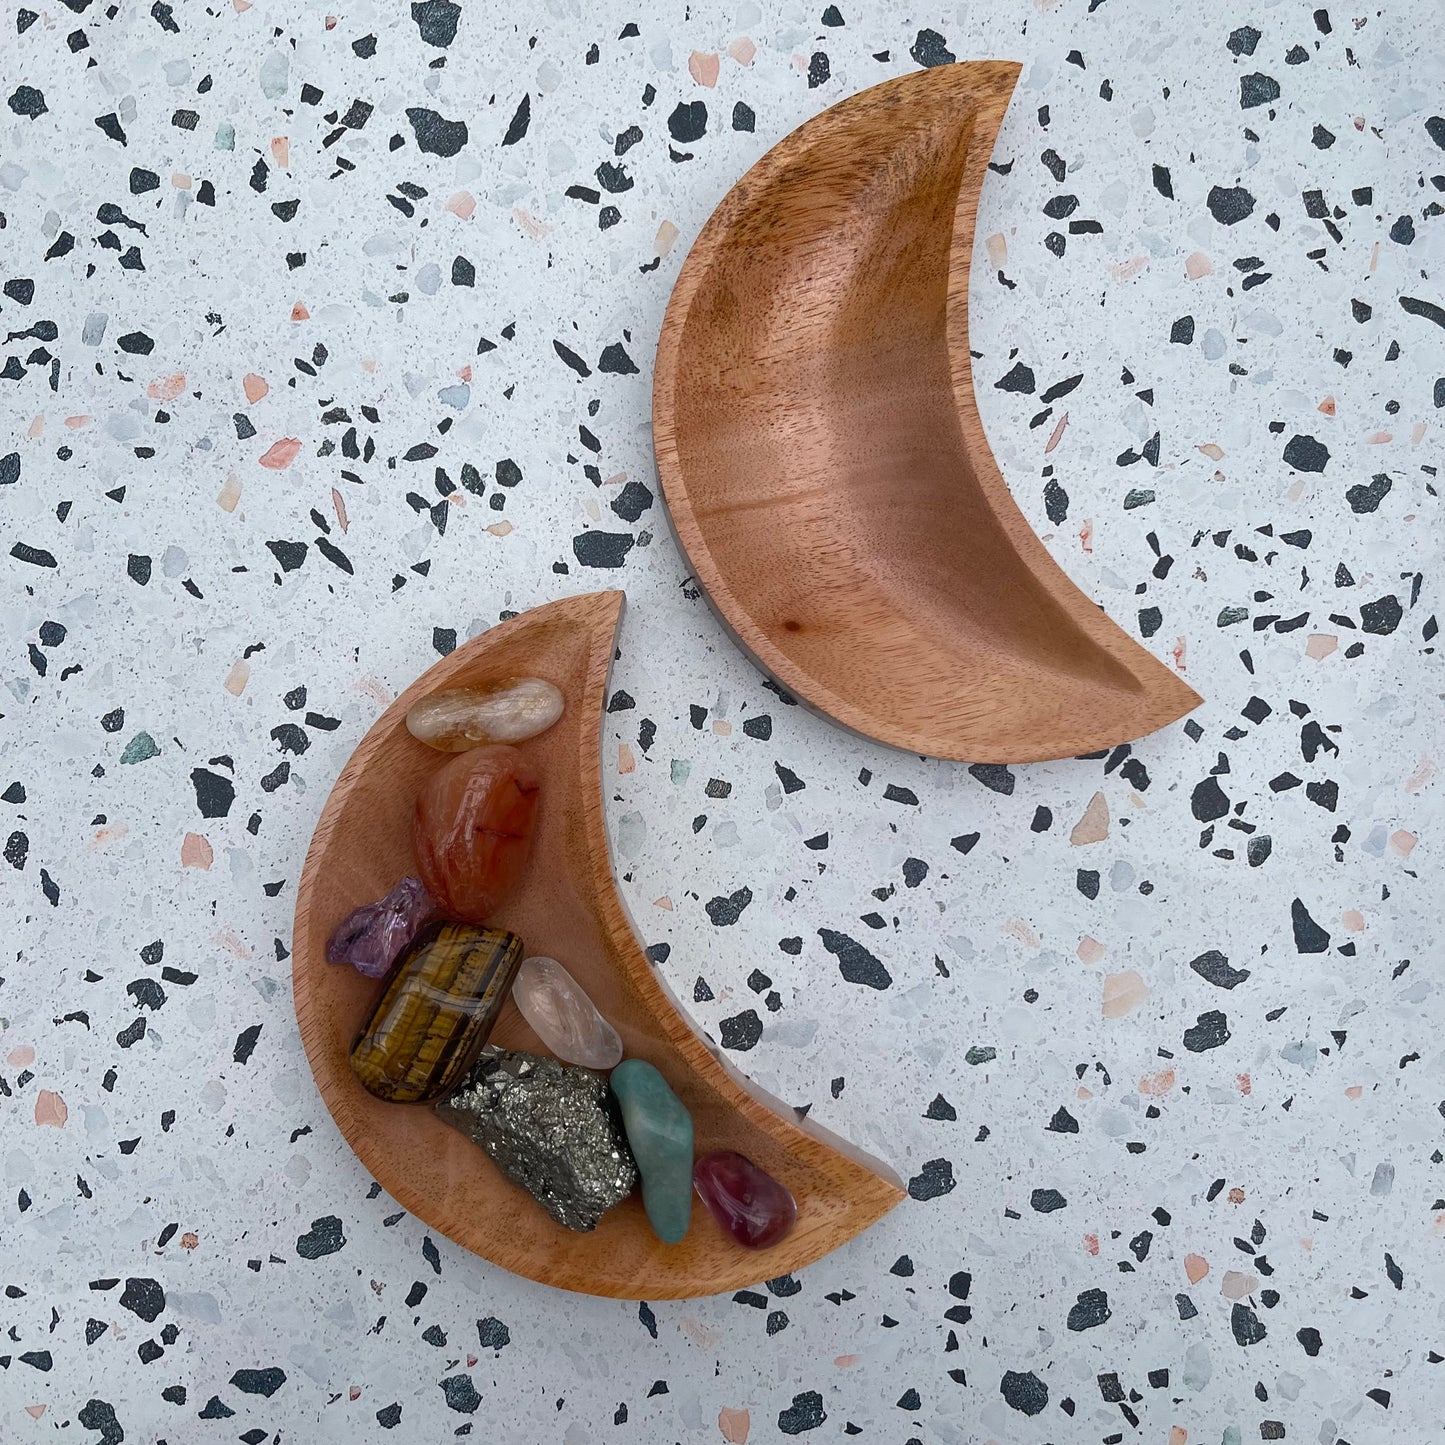 Wooden Crescent Moon Shaped Bowl